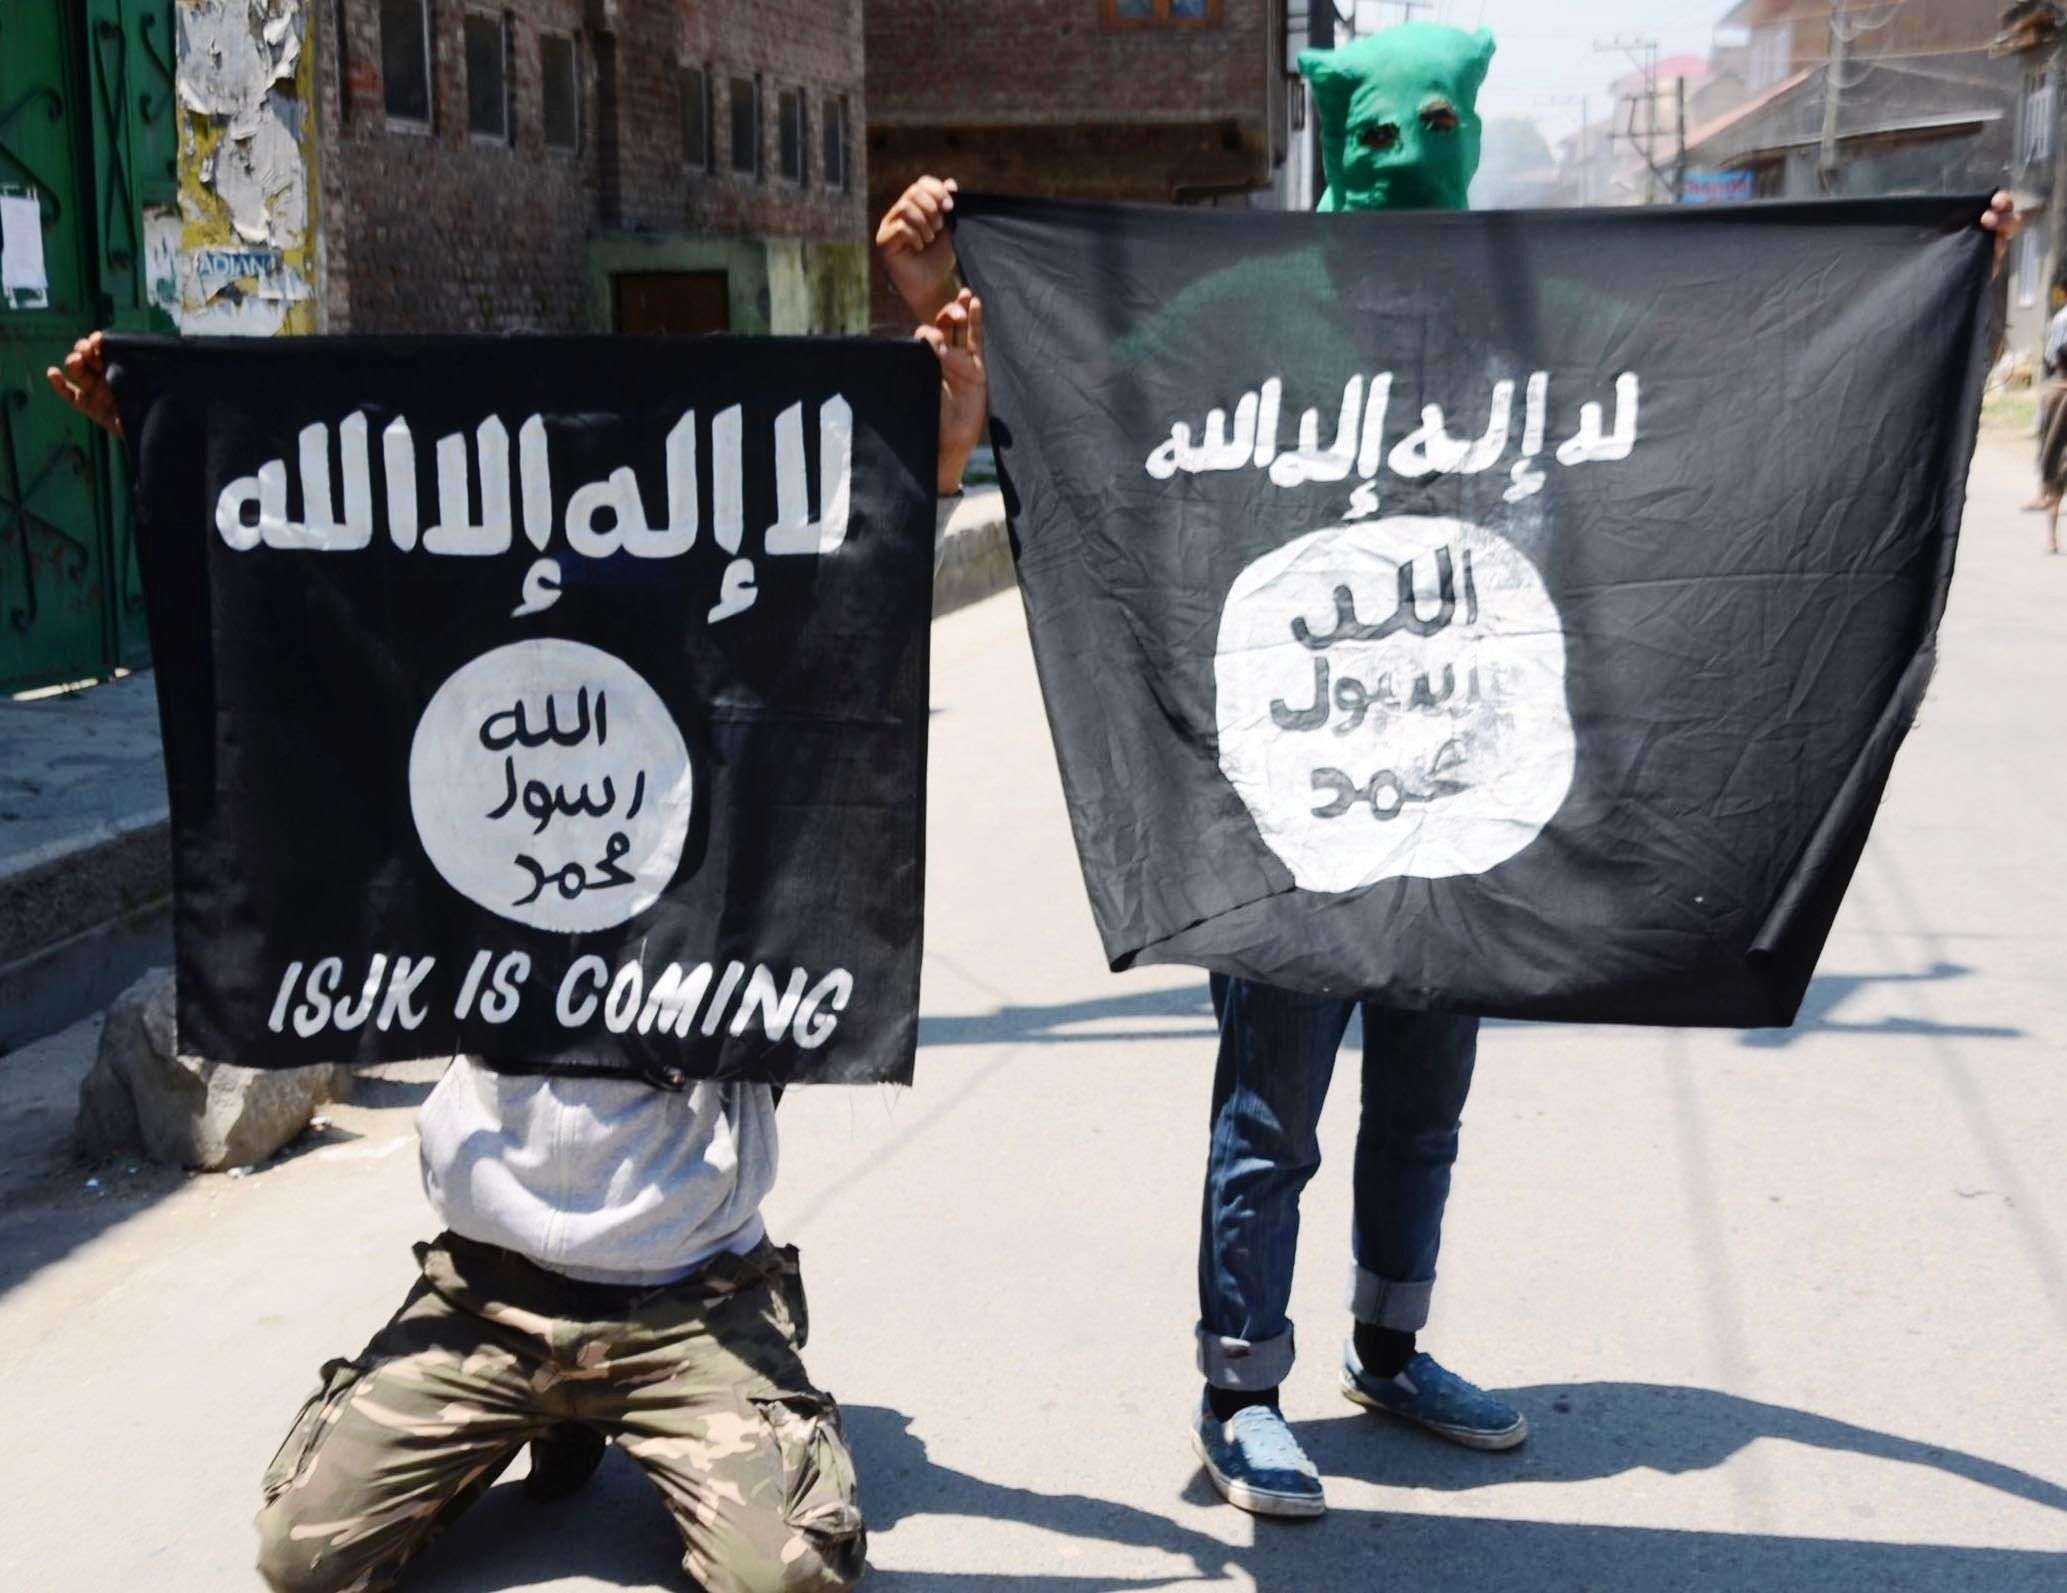 Youths displaying the flags of ISIS at Gojiwara in down town Srinagar as Kashmir valley observed a shut down on a call given by Hurriyat Conference (M) on Saturday against alleged forcible entry of security forces into historic Jamia masjid premises after Friday prayers PHOTO BY BILAL BAHADUR